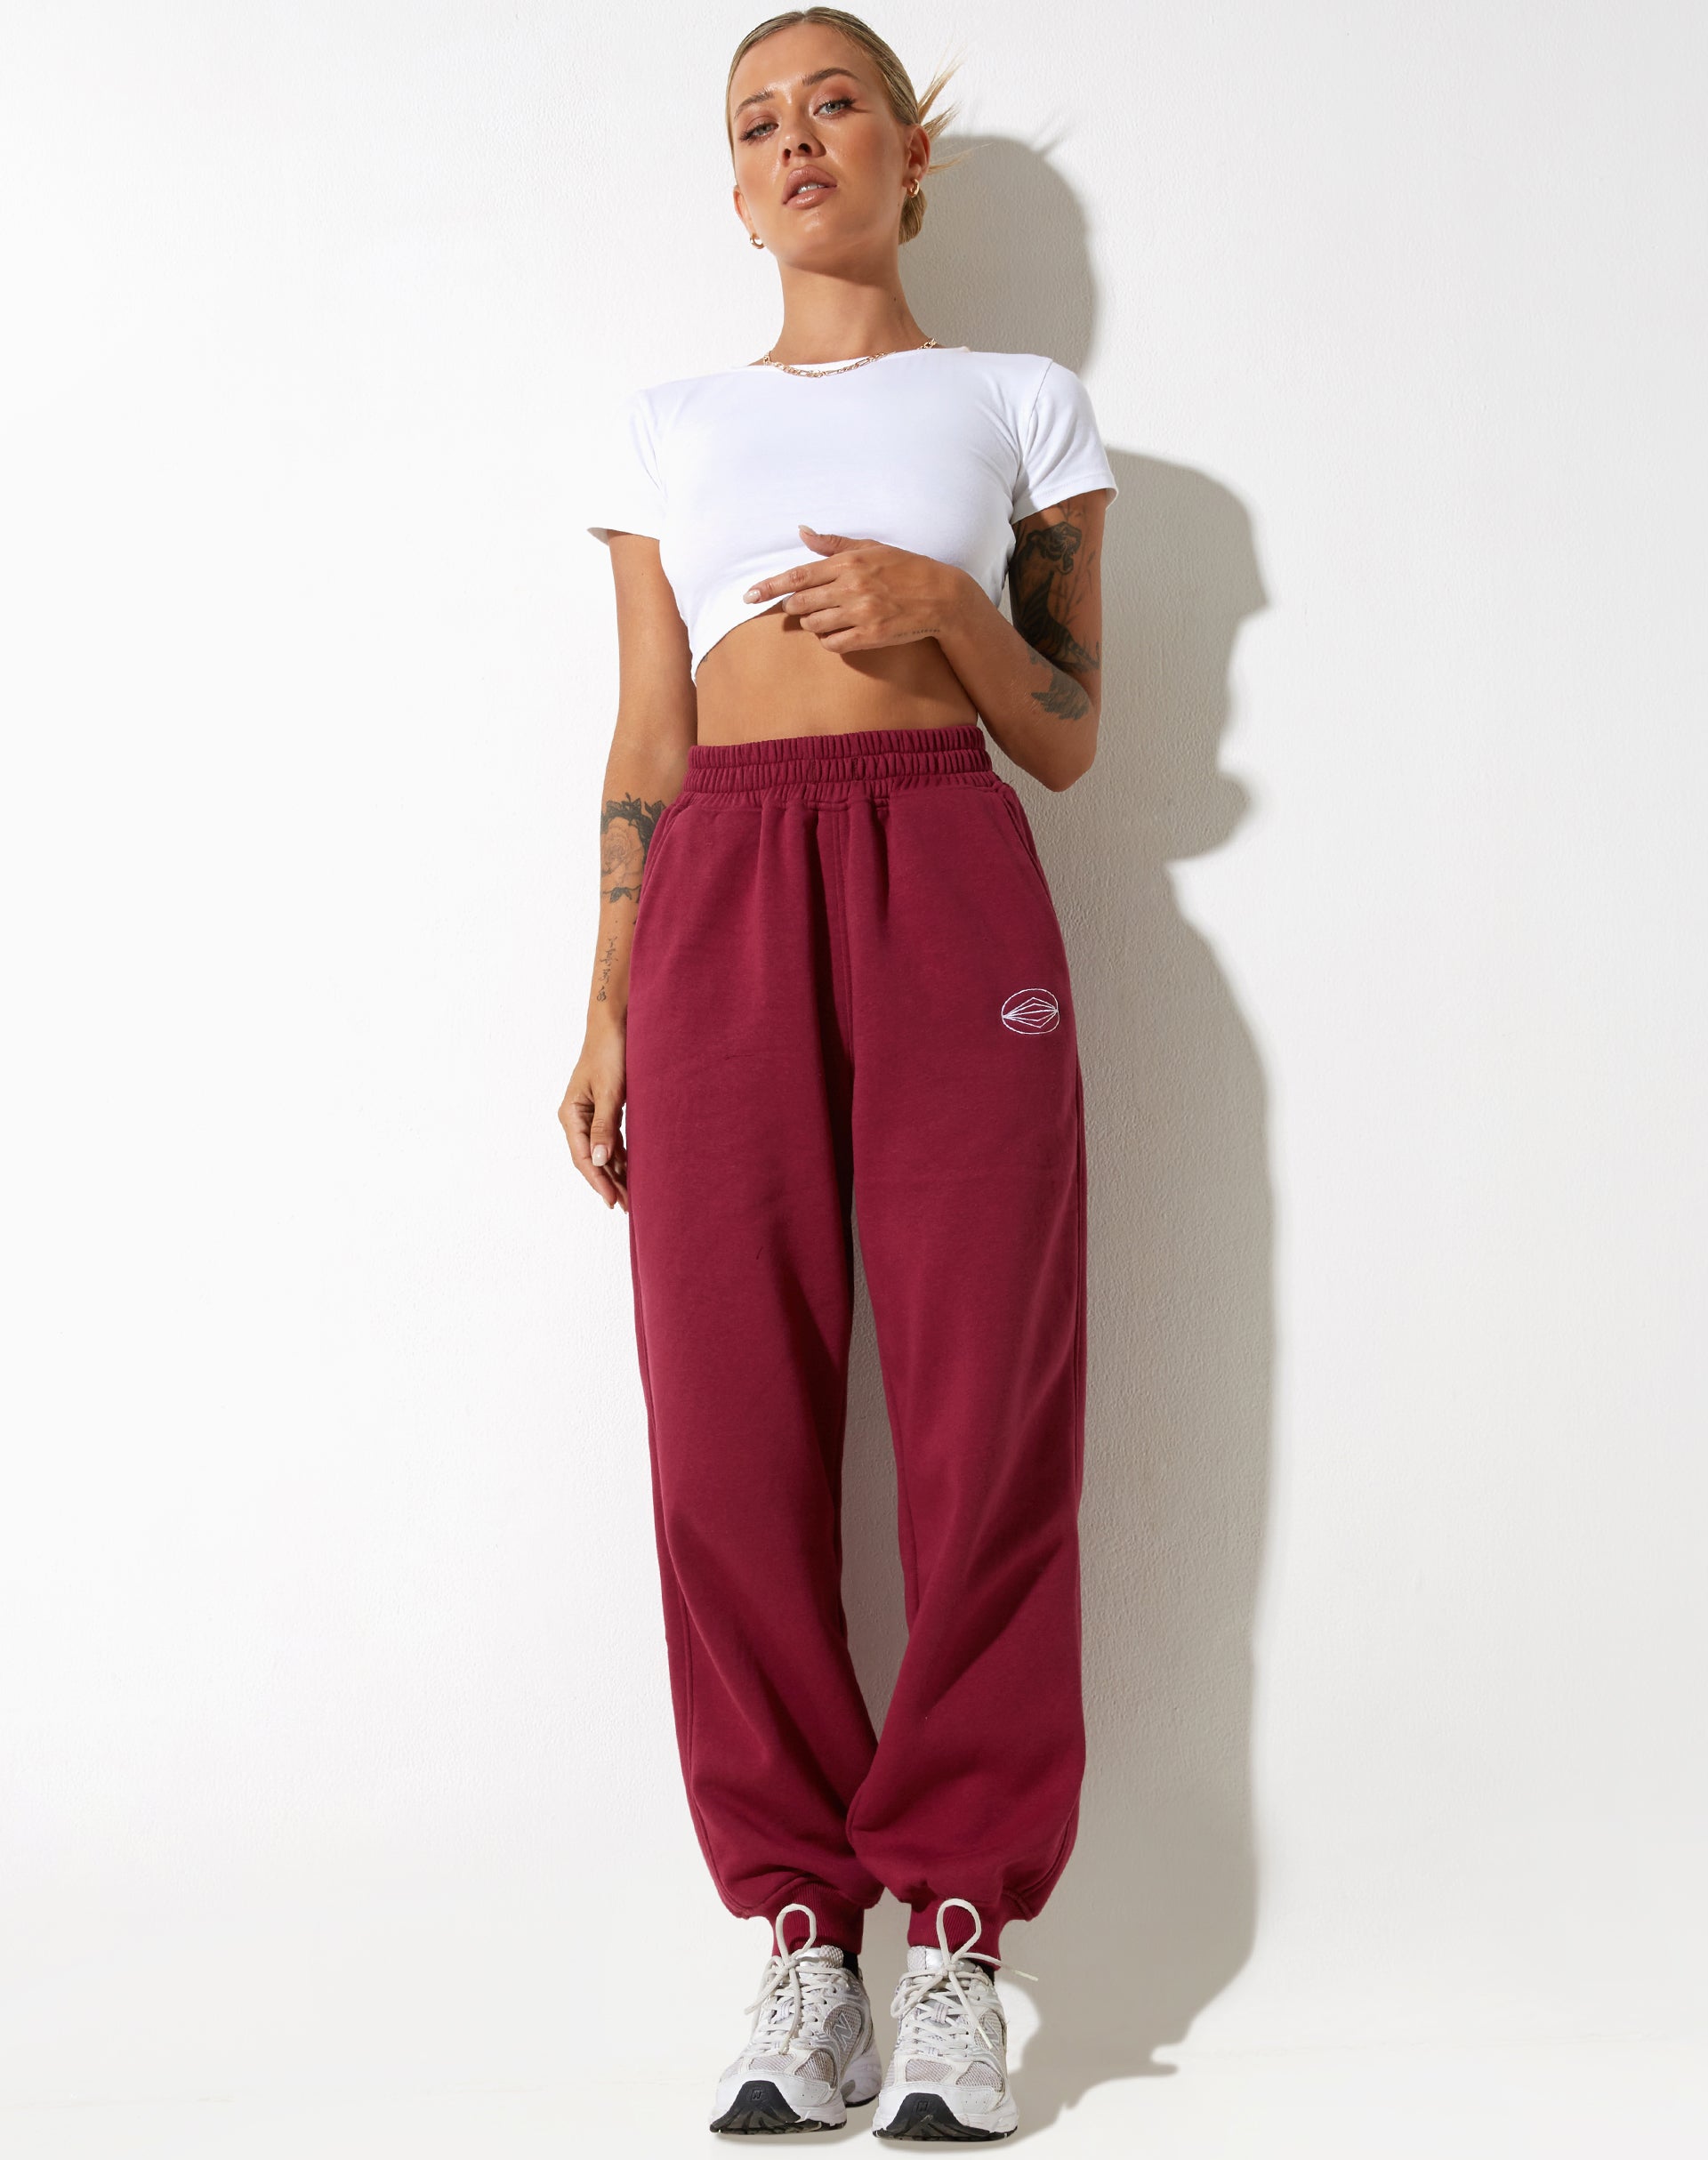 image of Roider Jogger in Burgundy with "Winning Team" Embro